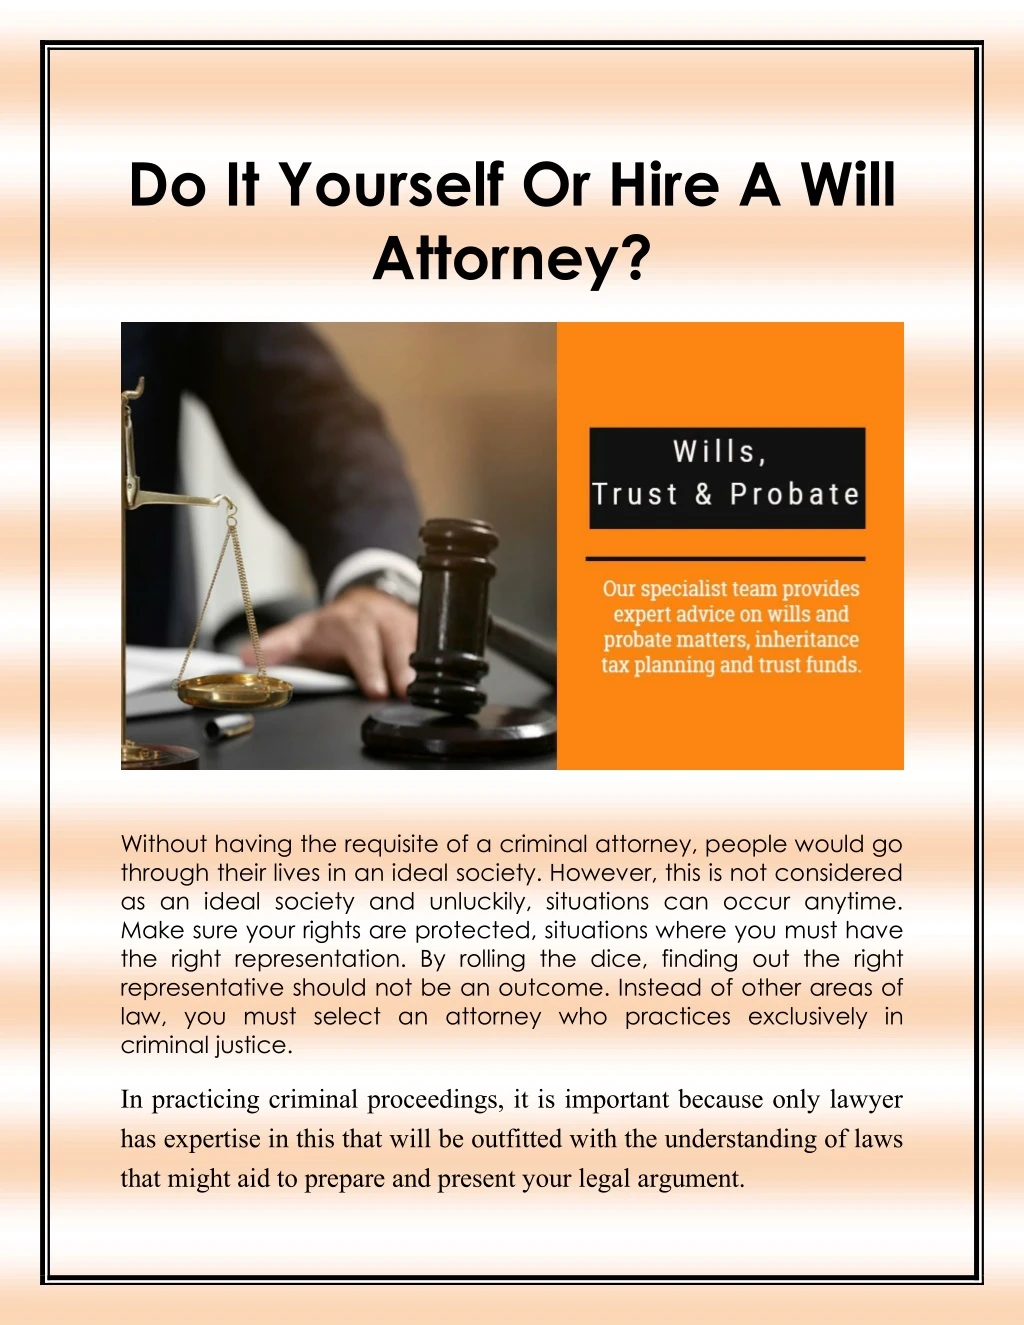 do it yourself or hire a will attorney